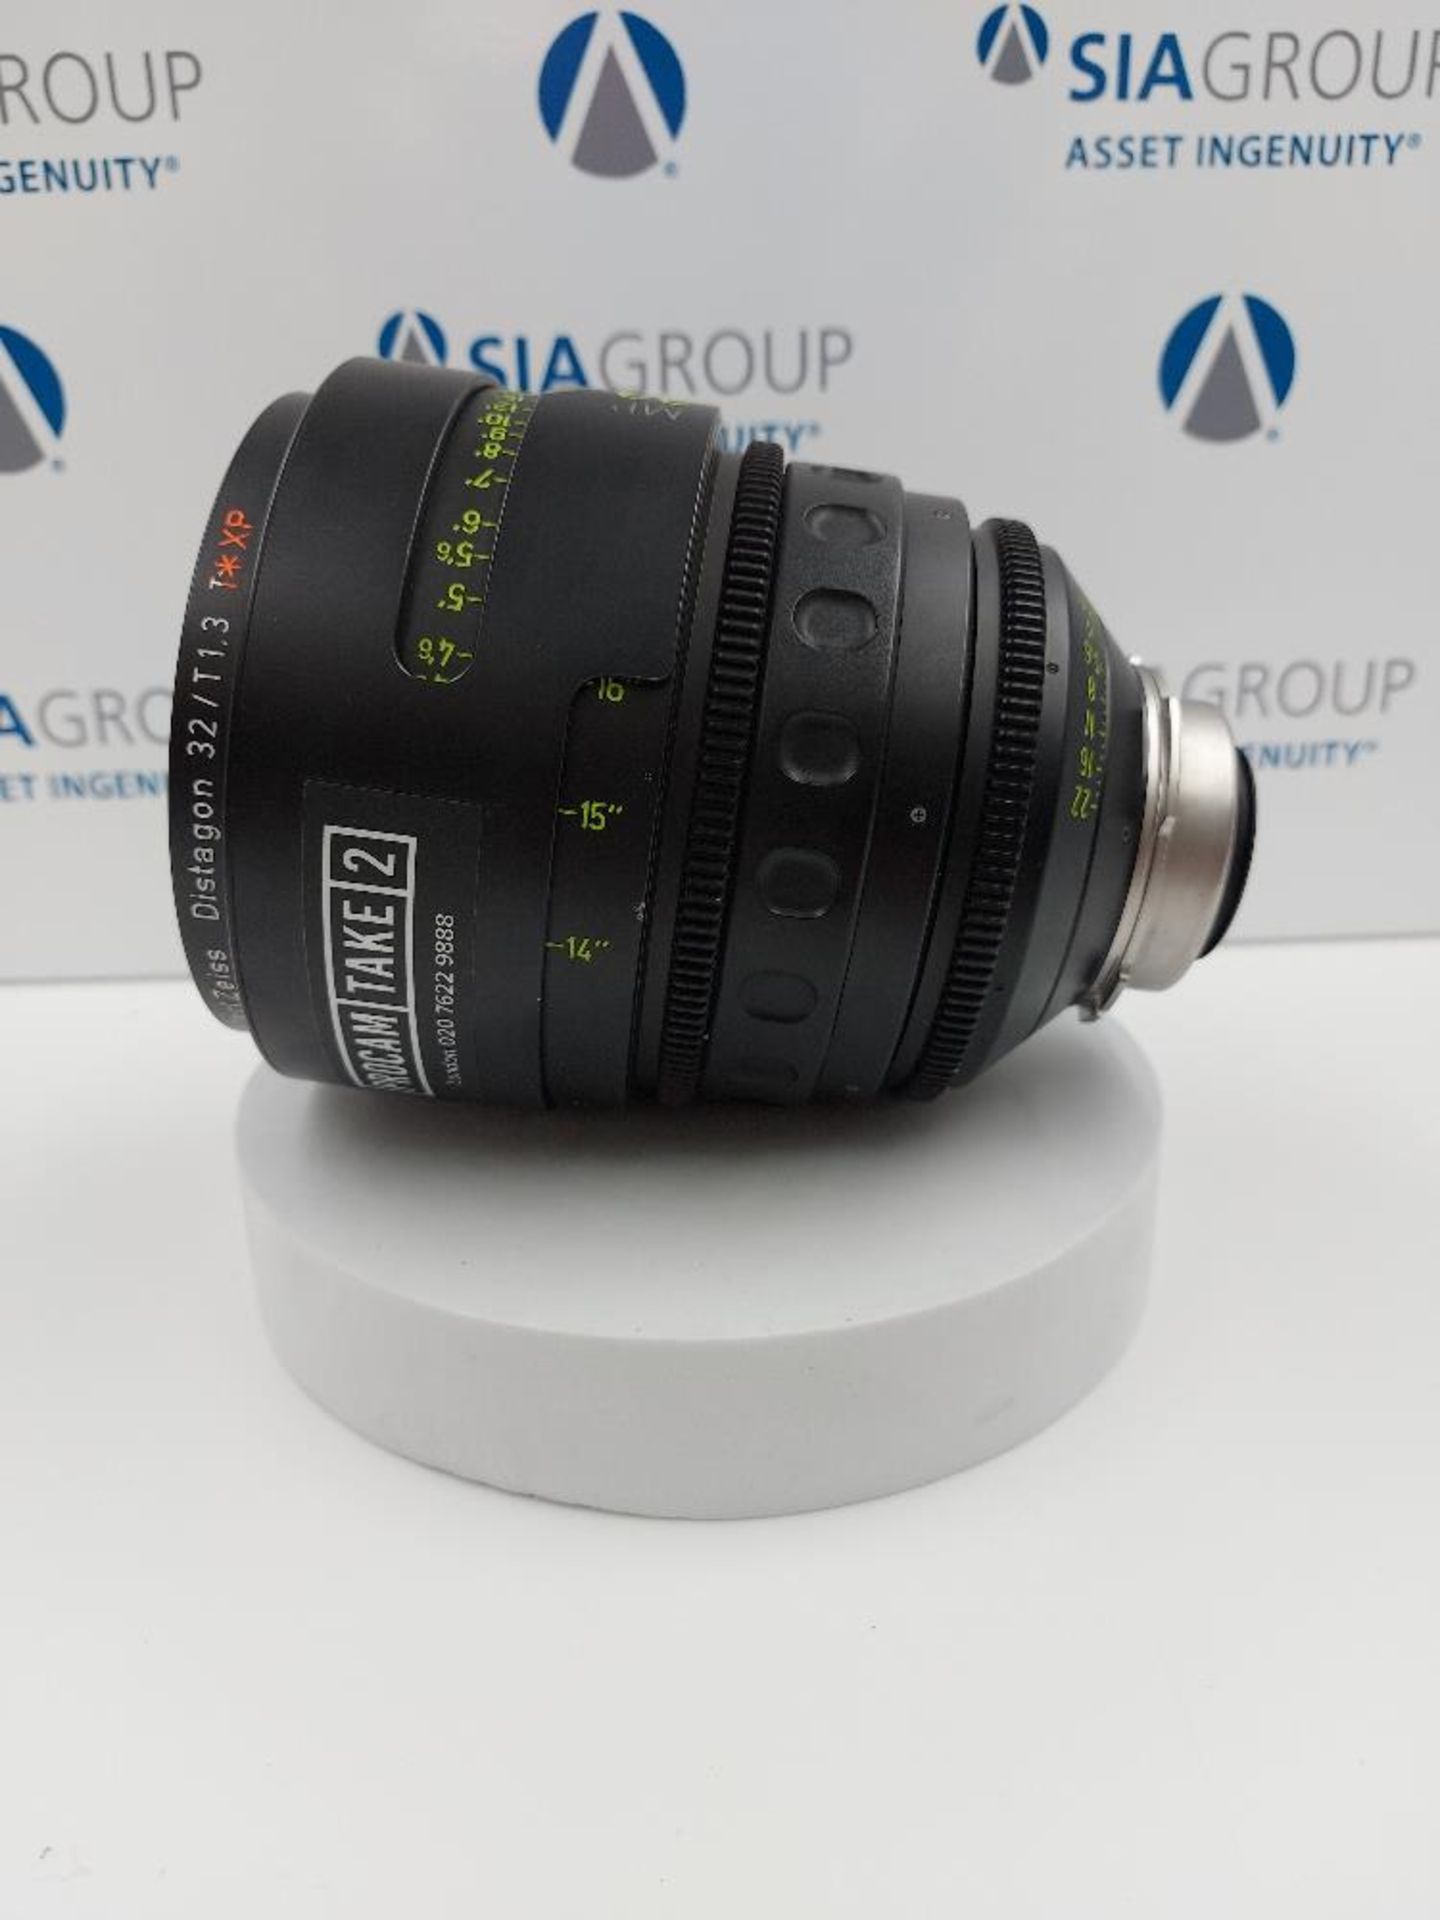 Zeiss ARRI Master Prime 32mm T1.3 Lens with PL Mount - Image 4 of 6